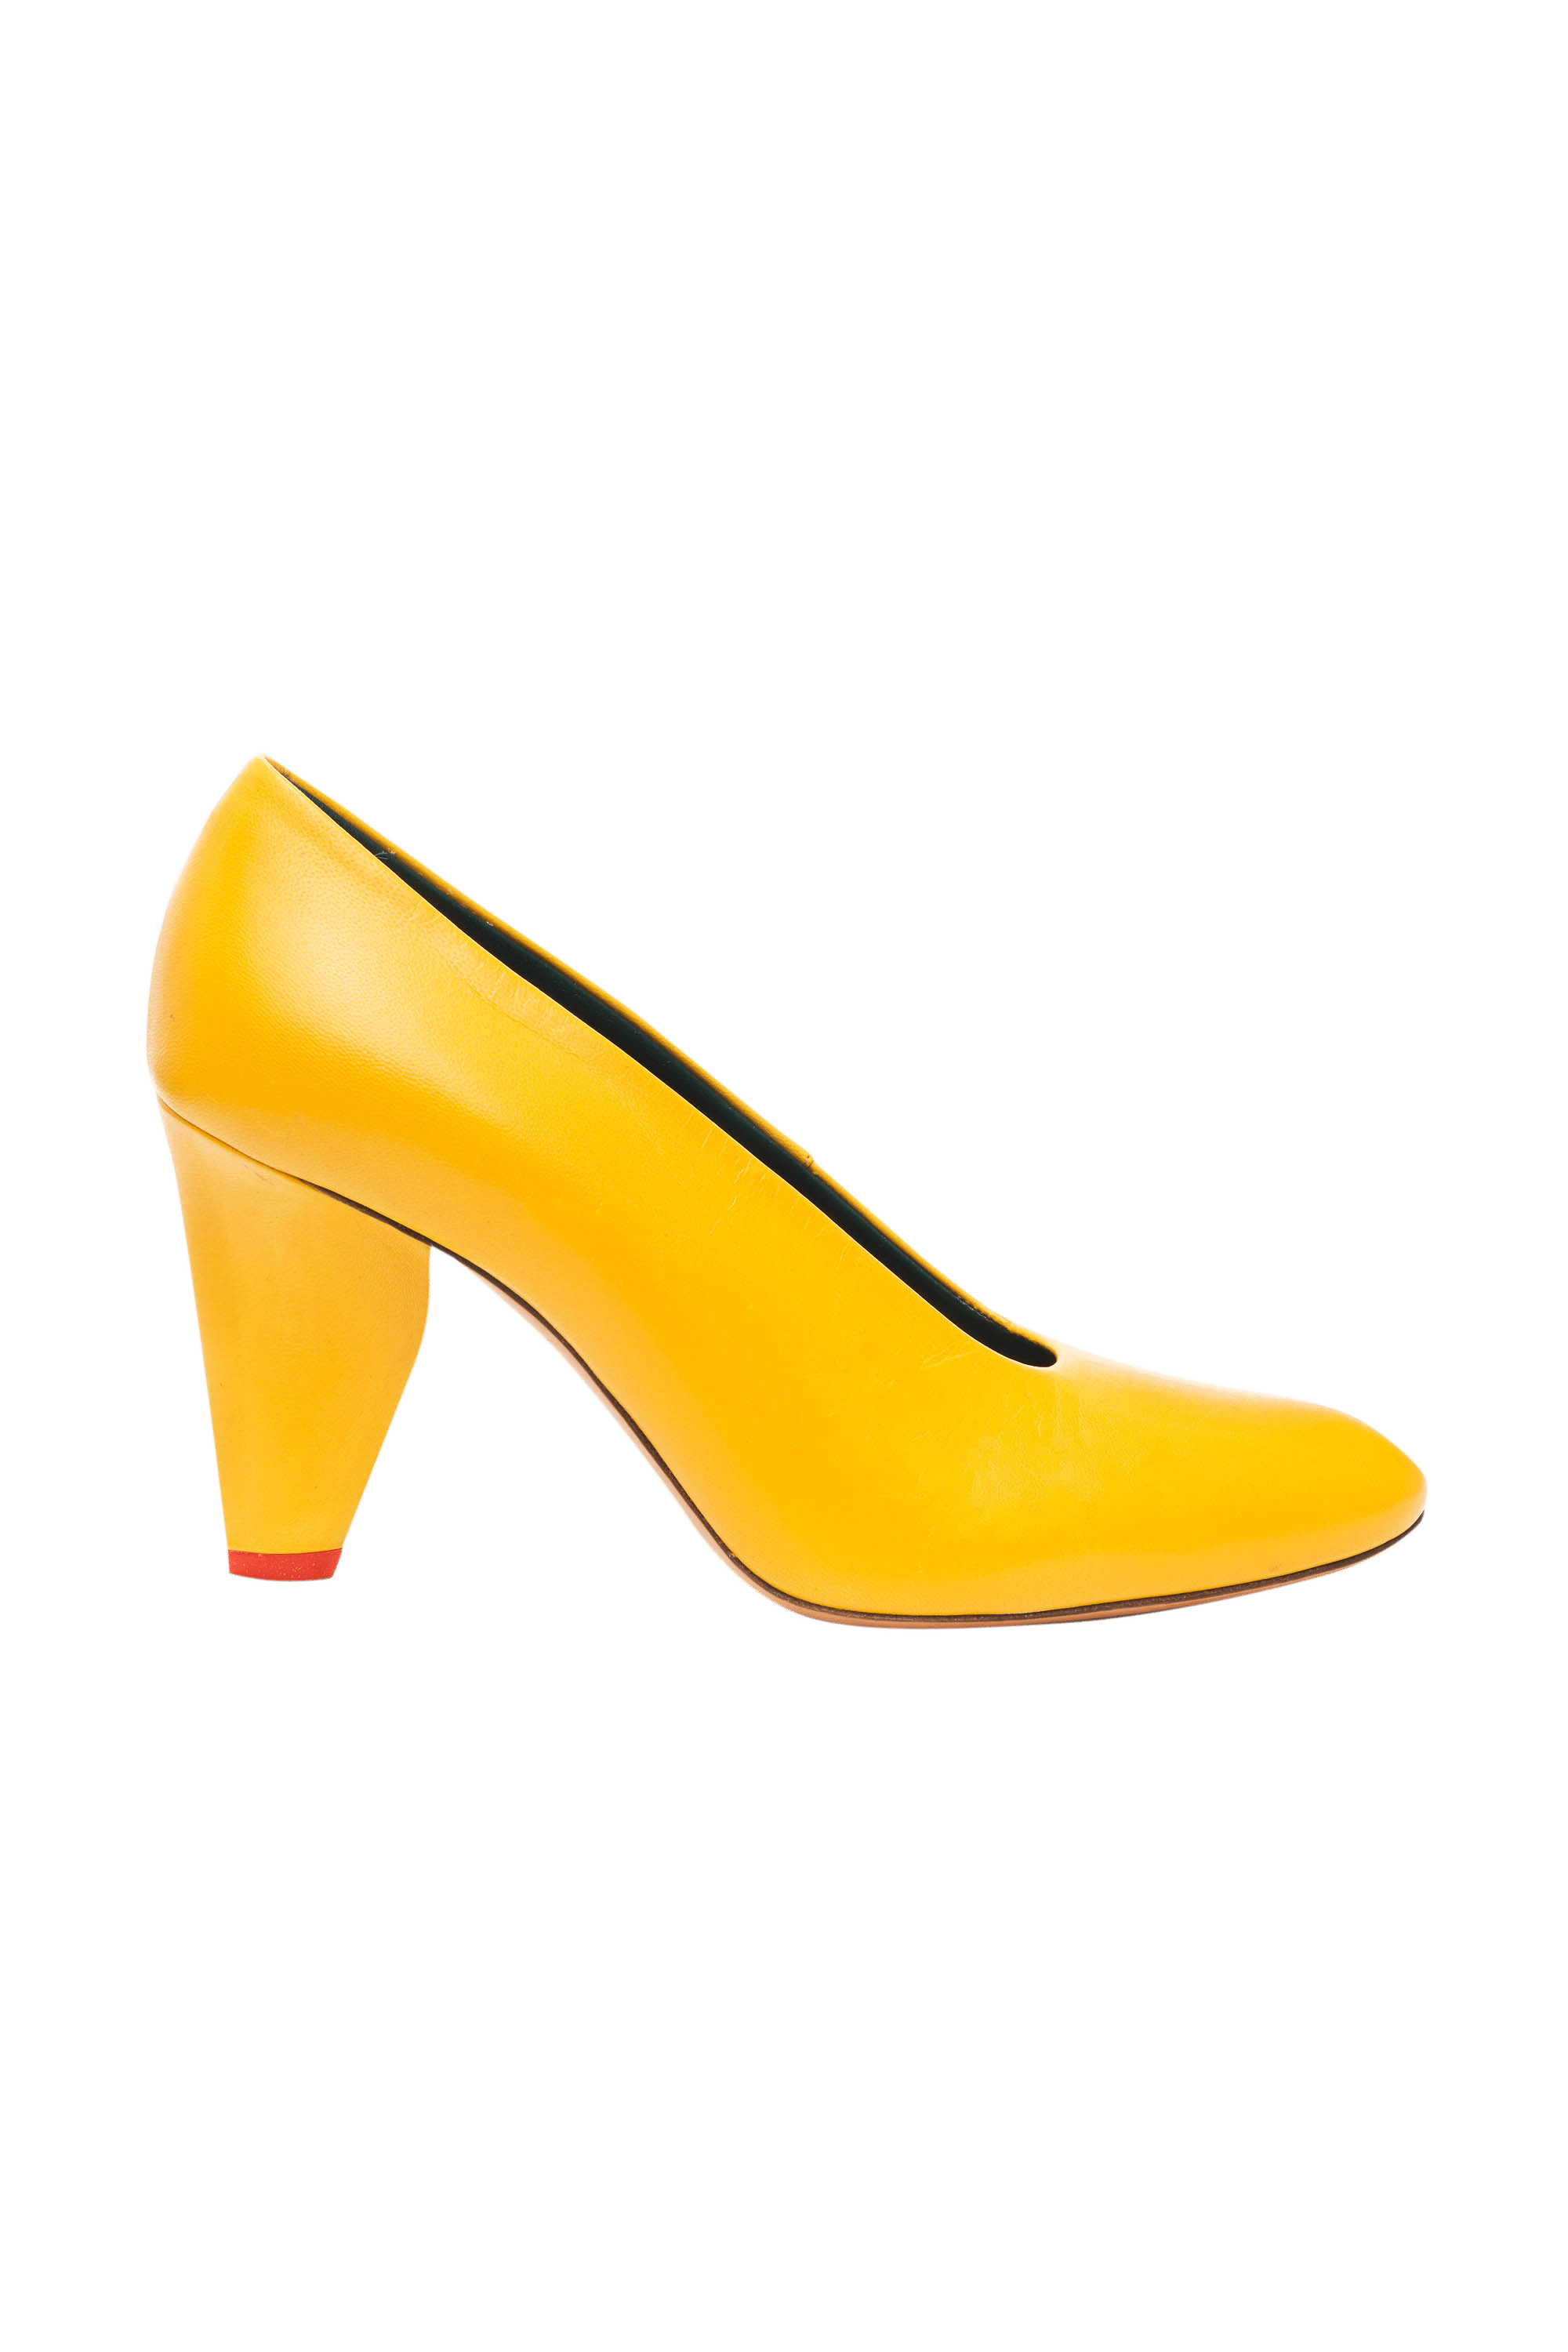 Celine Yellow Pumps with Red Heel Size 36 - Foxy Couture Carmel